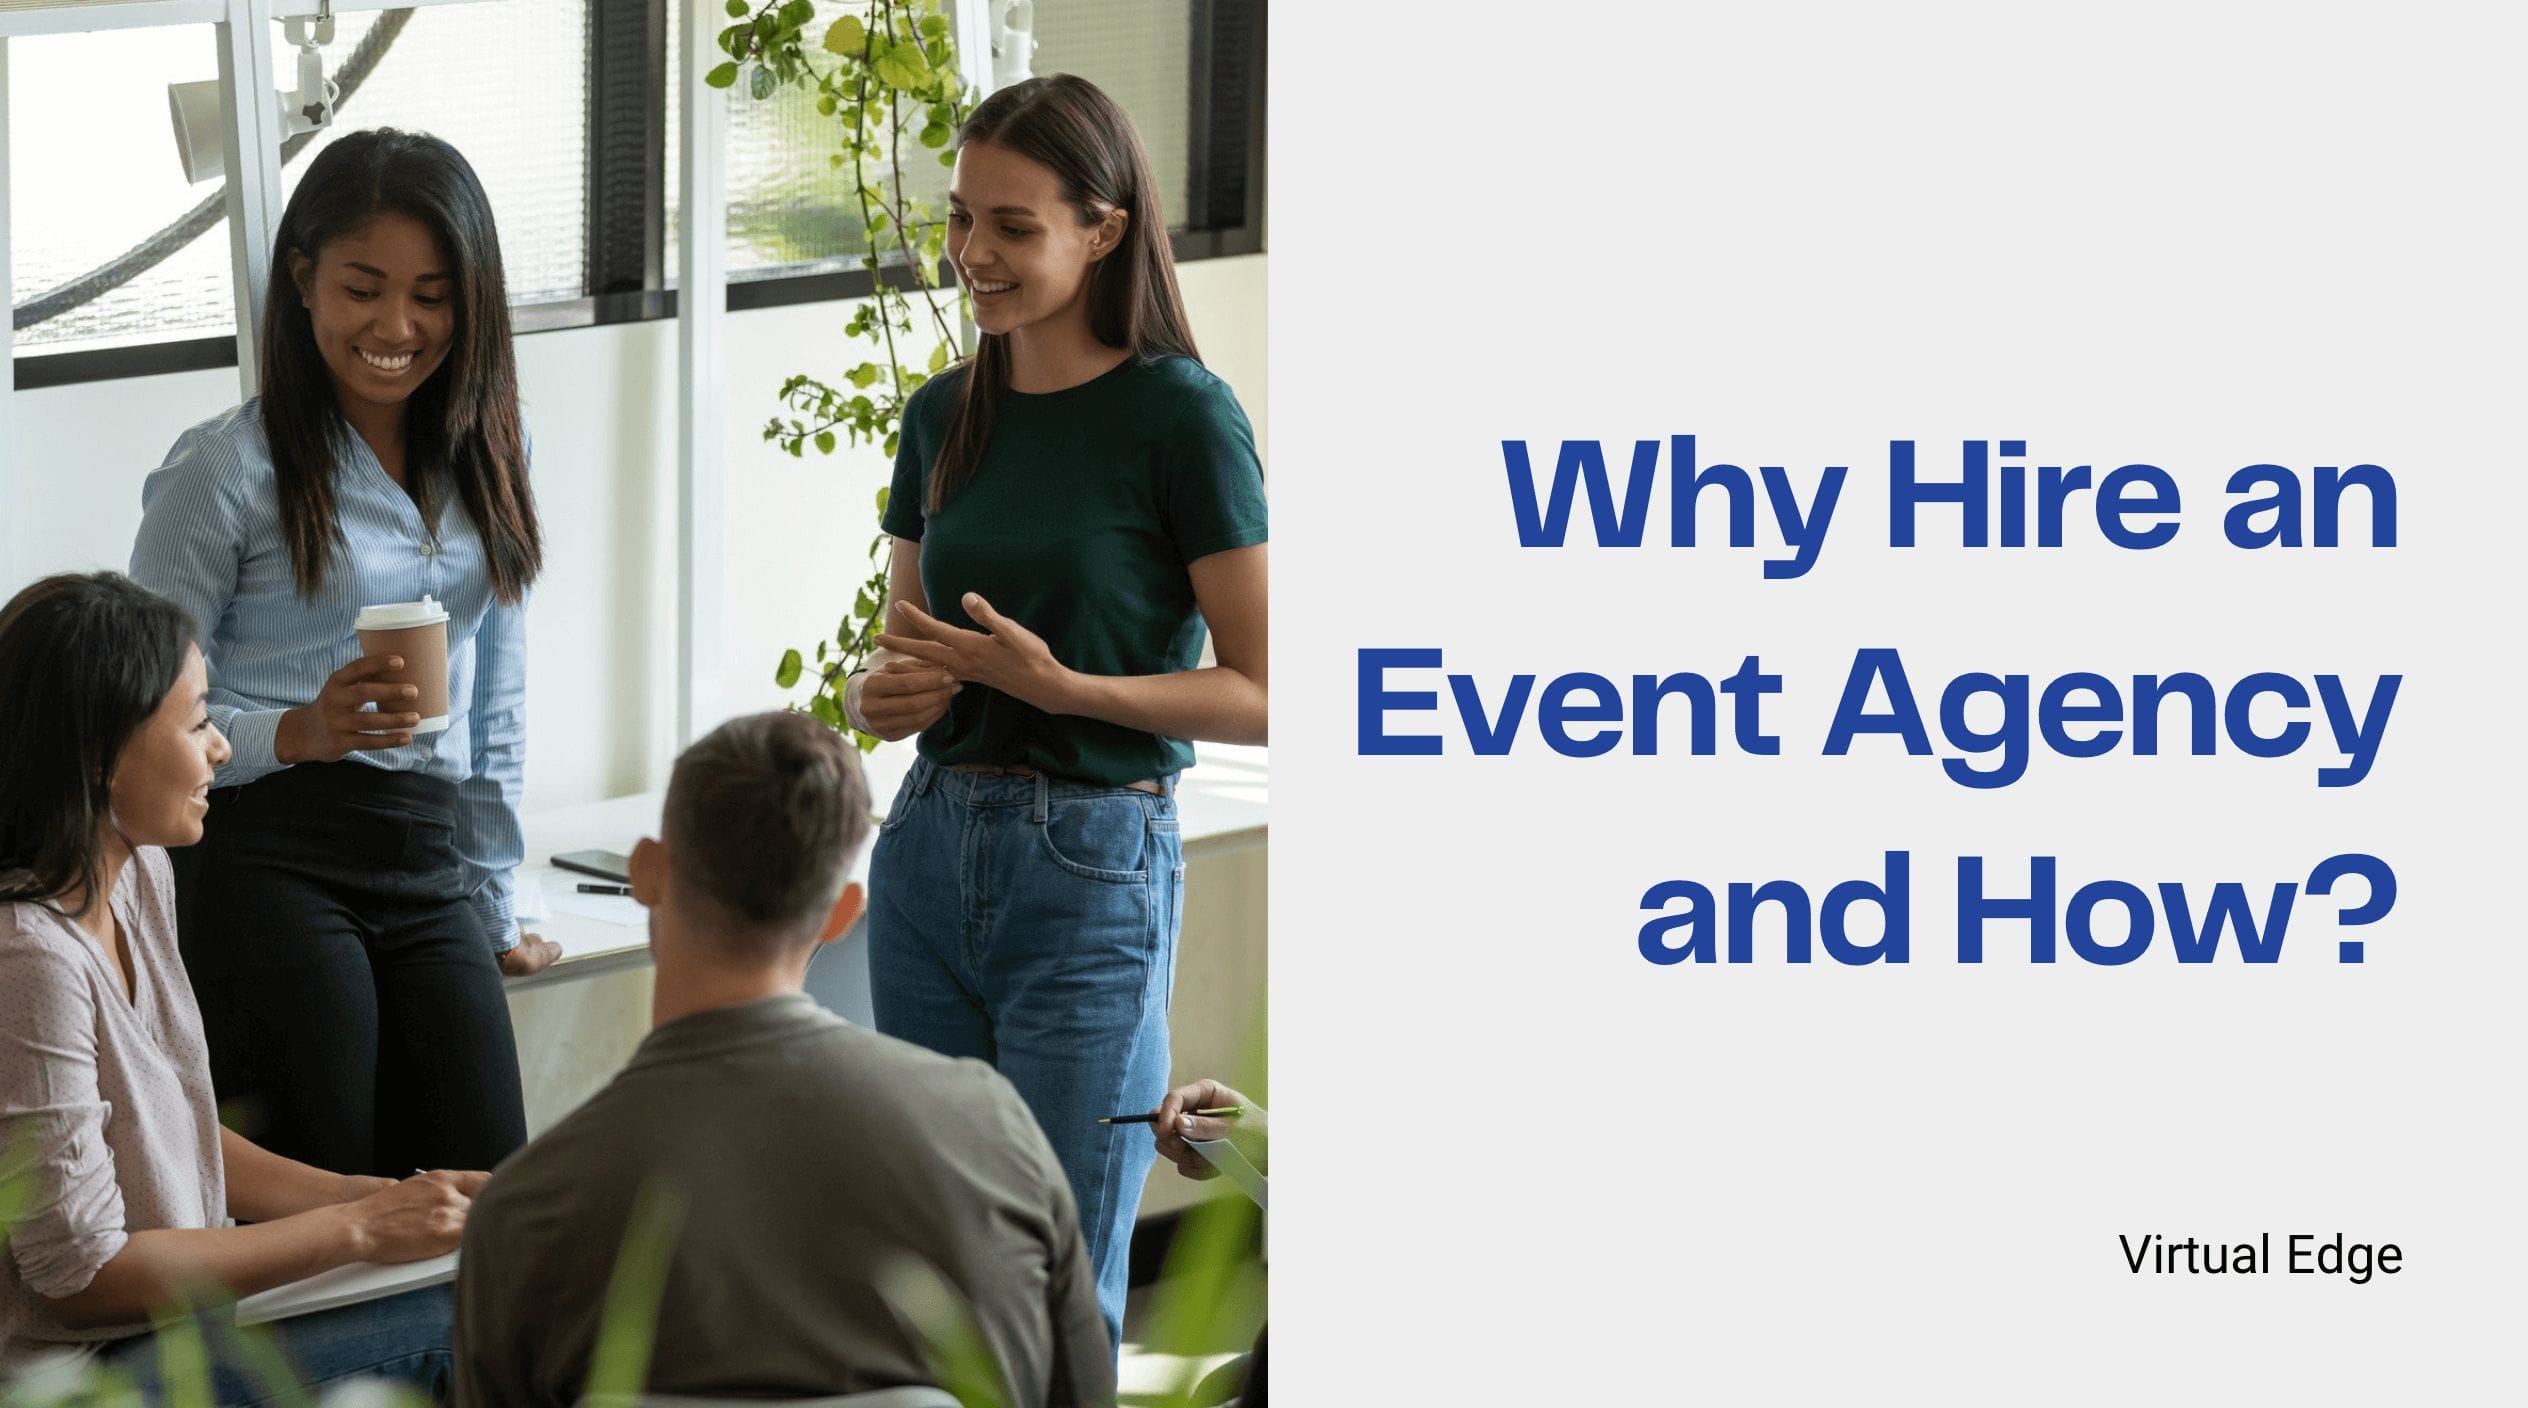 Why Hire an Event Agency and How?